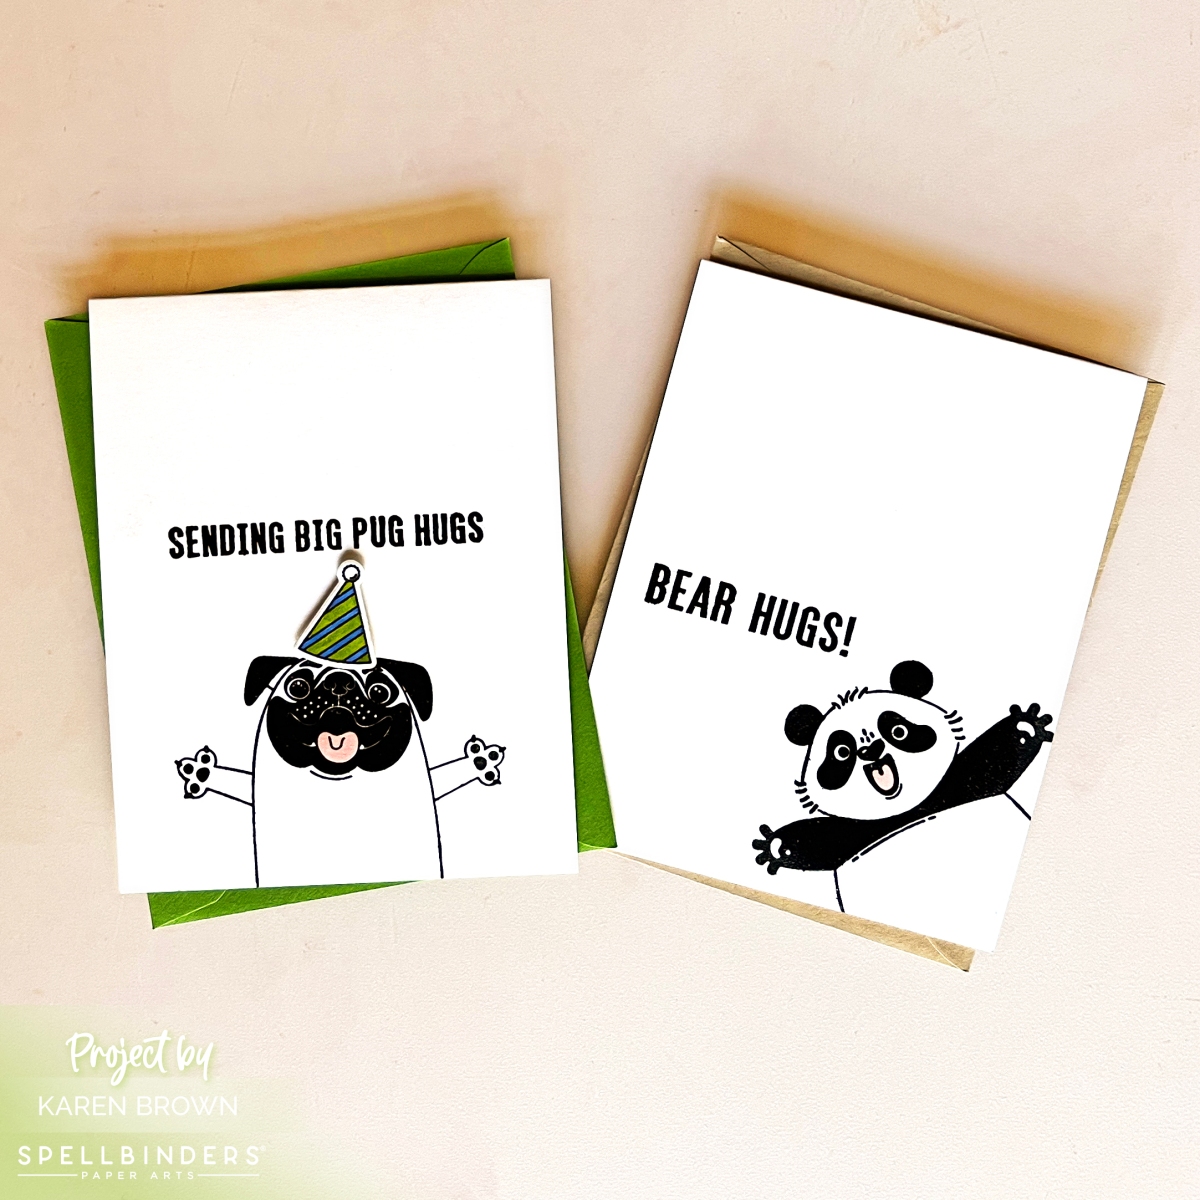 Two Easy Pug Dog and Panda Bear Cards with Minimal Supplies